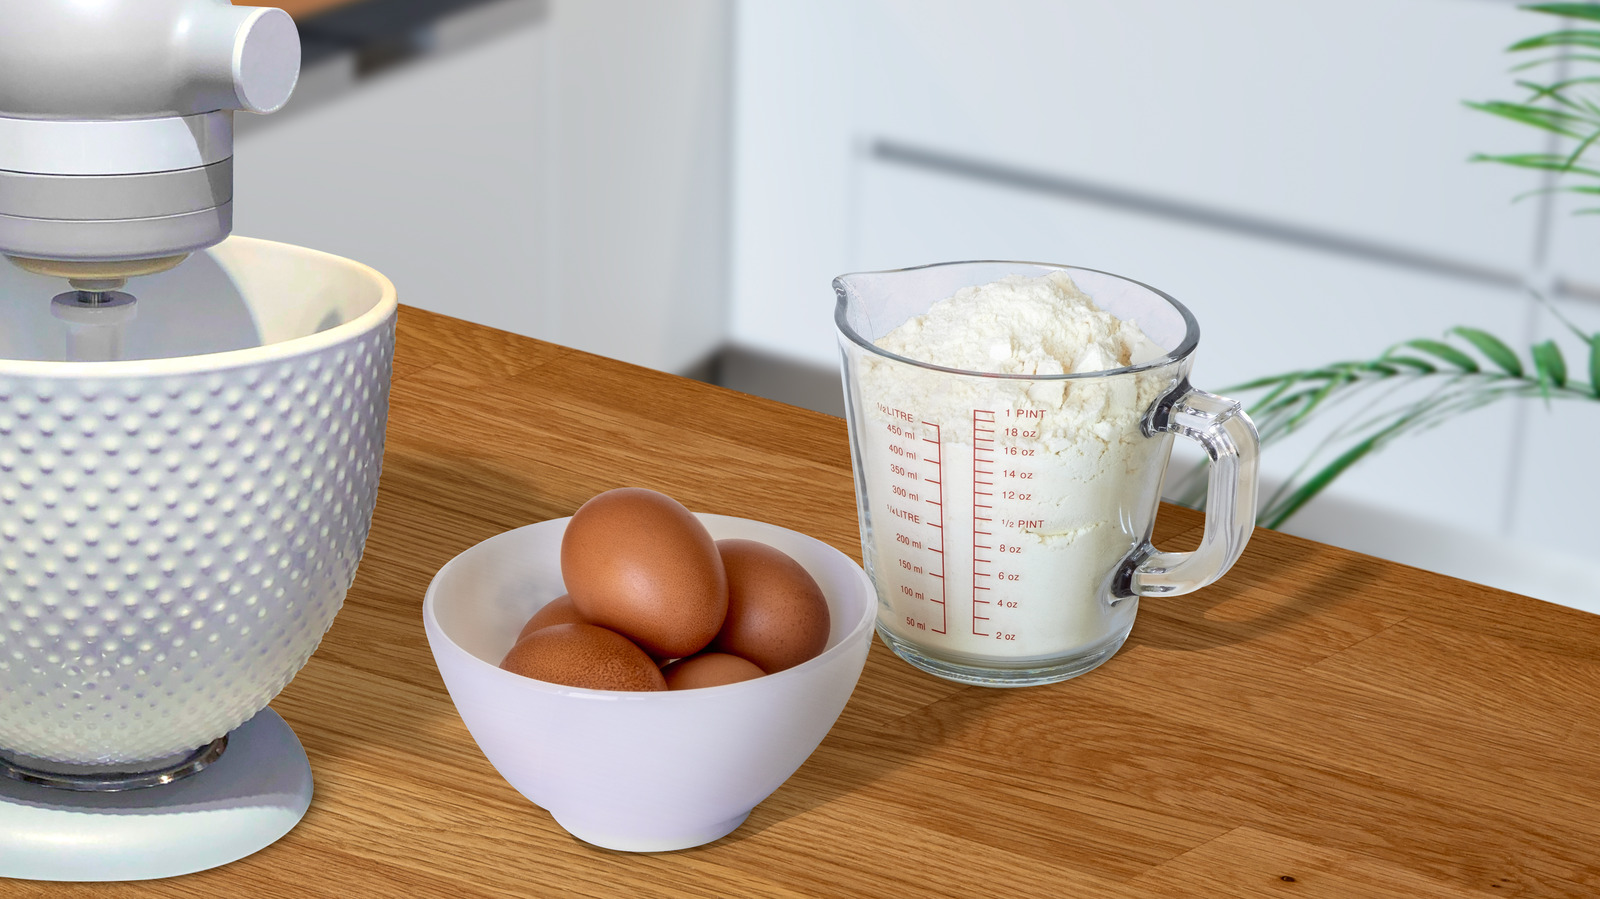 https://www.thedailymeal.com/img/gallery/do-you-need-a-flexible-measuring-cup-in-your-kitchen/l-intro-1673711912.jpg